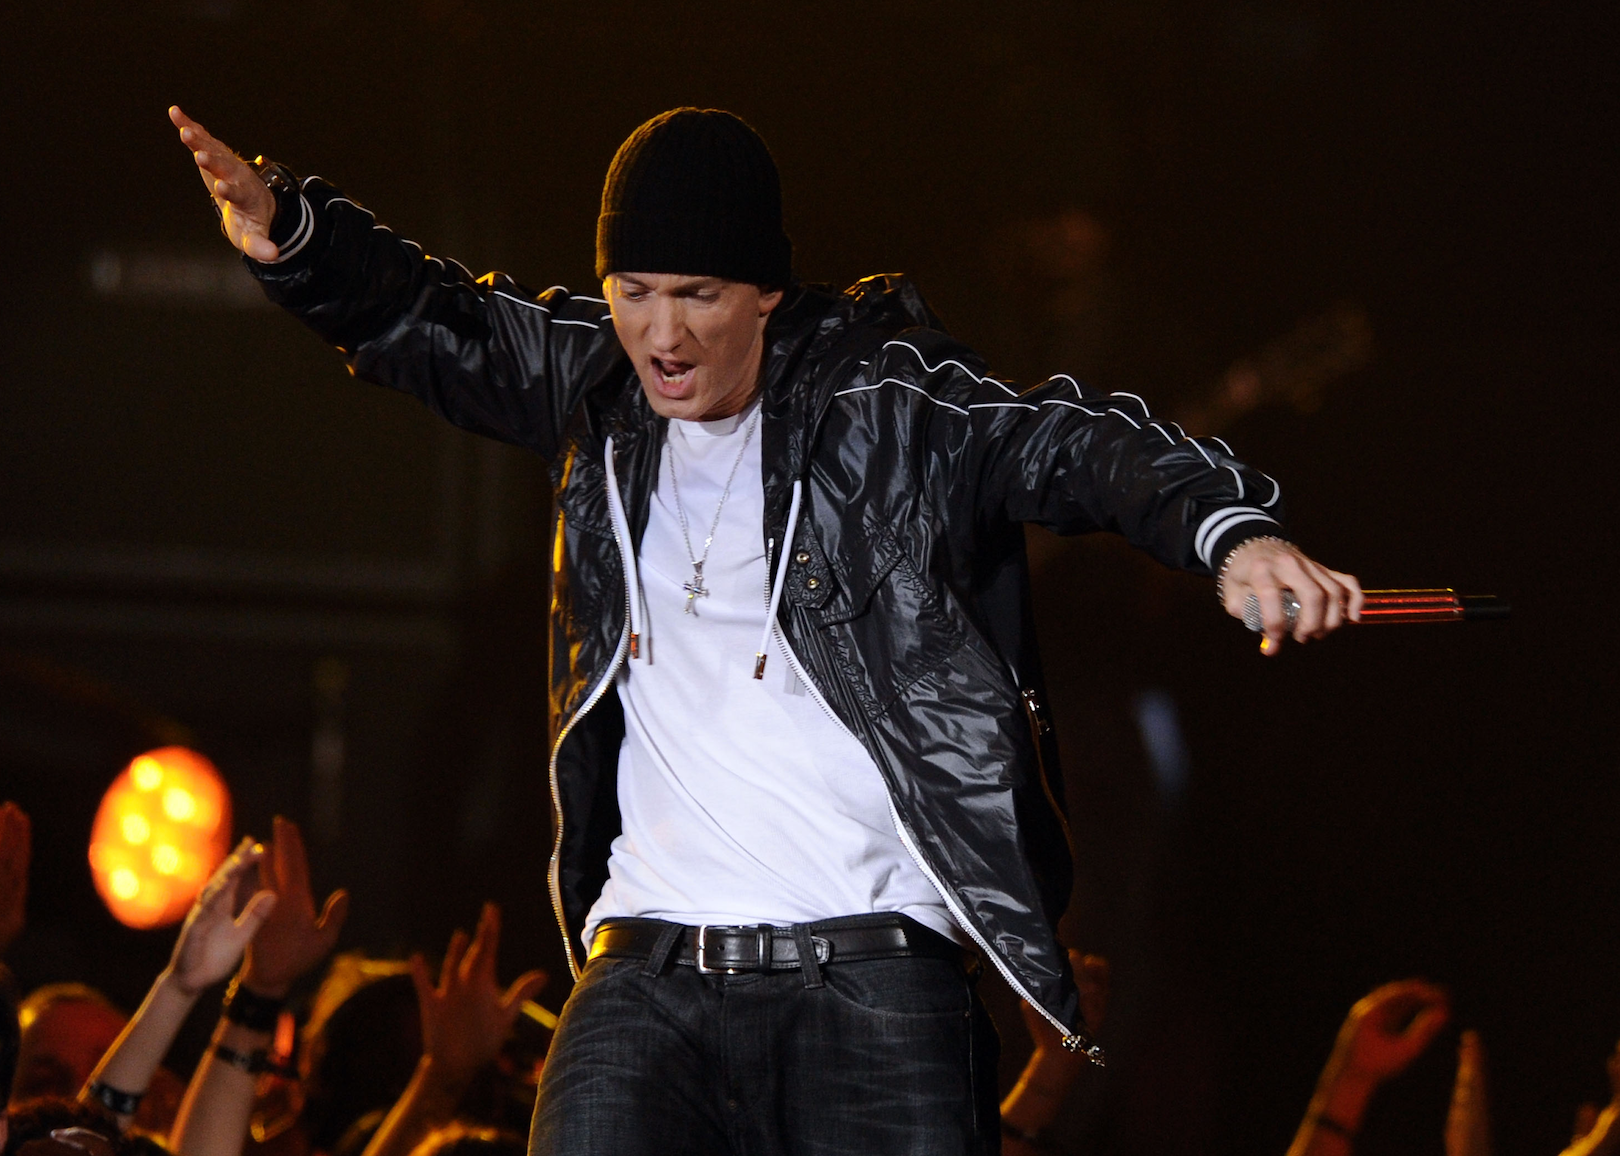 Eminem dancing in black and white onstage.